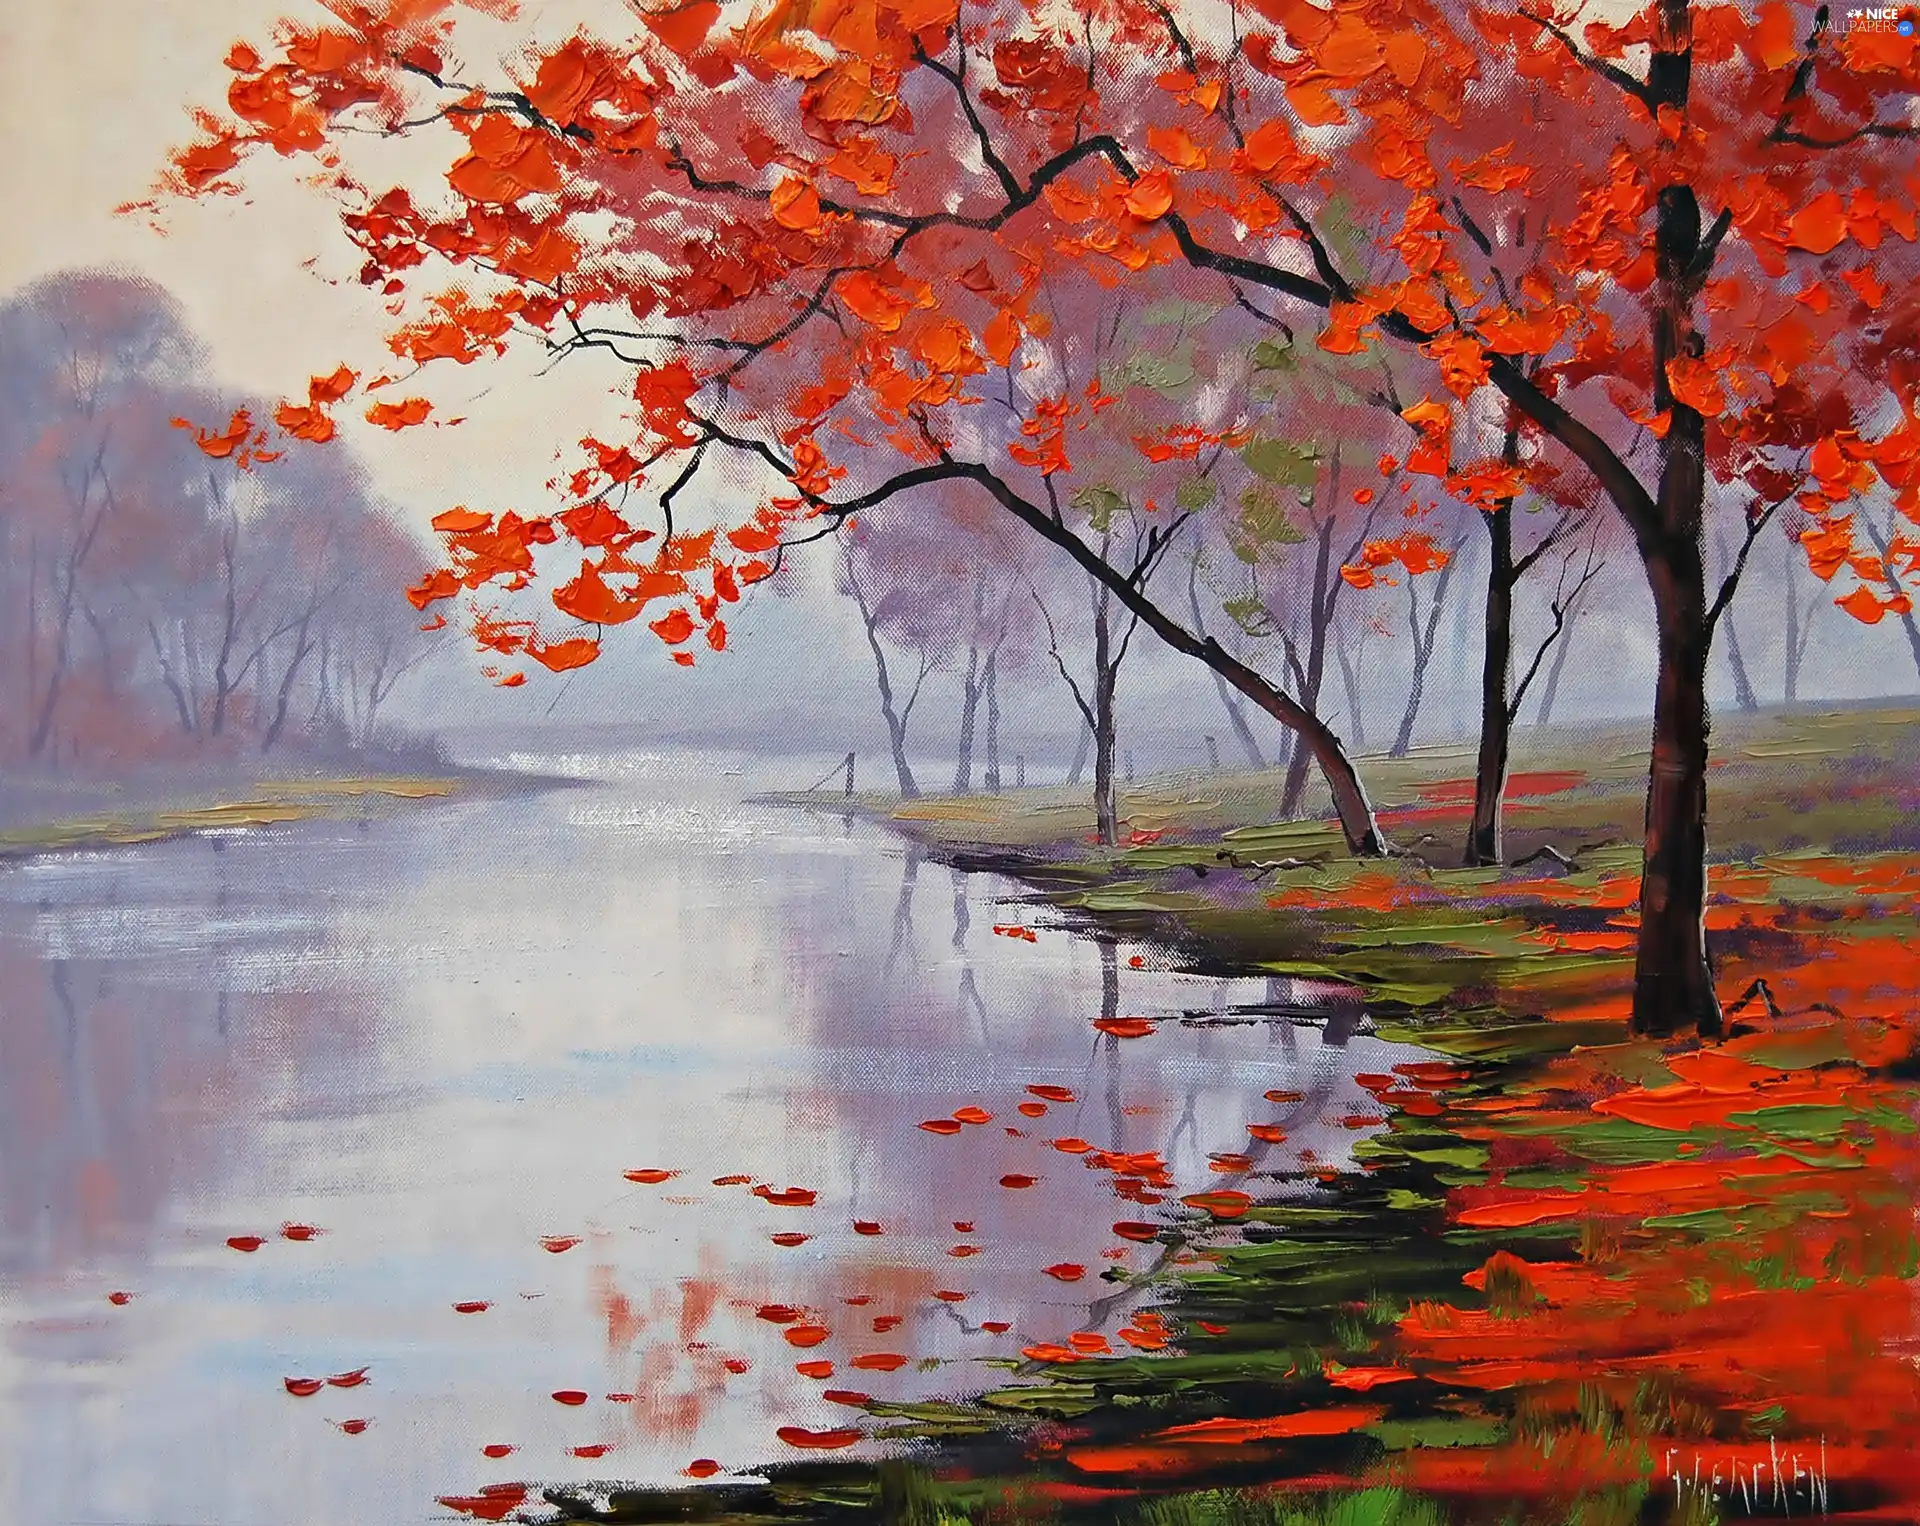 Red, Leaf, trees, viewes, River